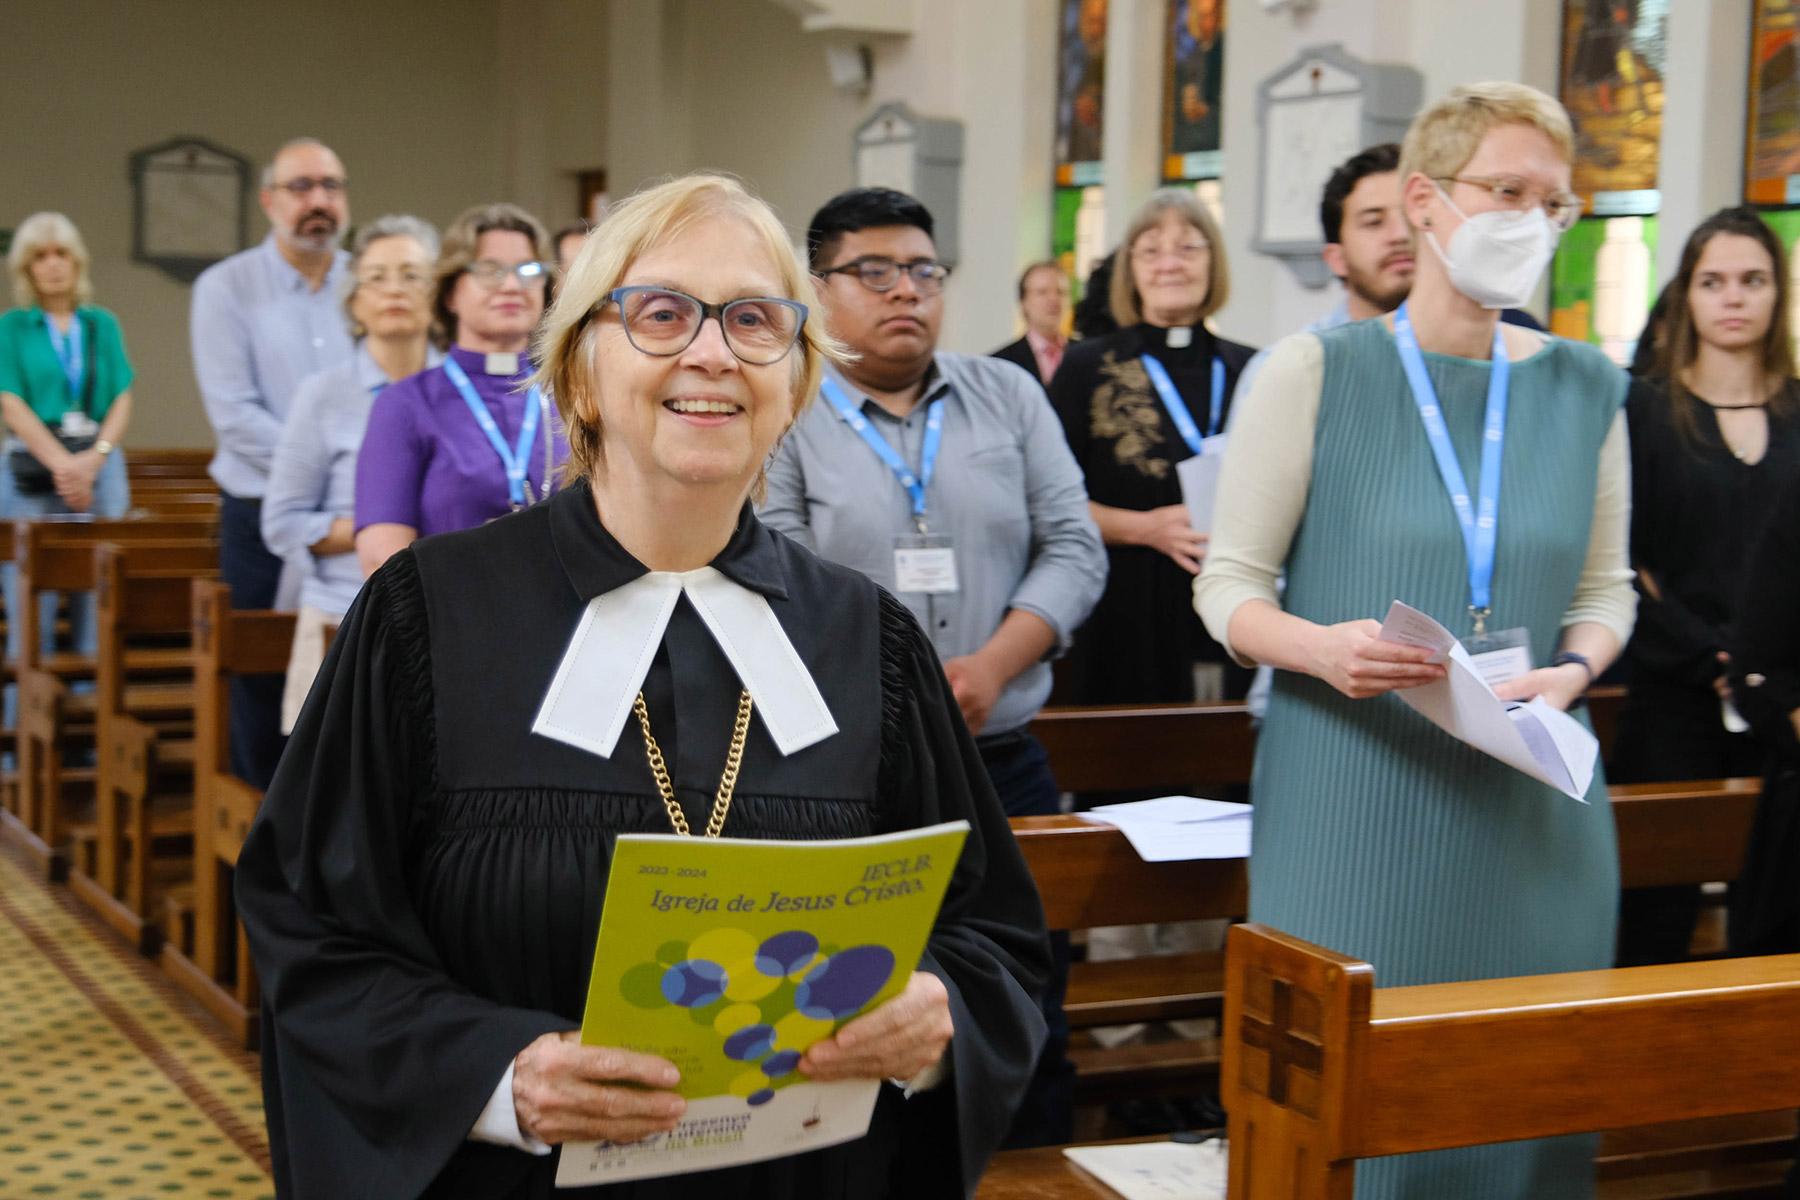 Rev. Sílvia Genz, Pastor President of the Evangelical Church of the Lutheran Confession in Brazil (IELCB) which is hosting the COL during the opening worship. Photo: LWF/Gabriela Giese